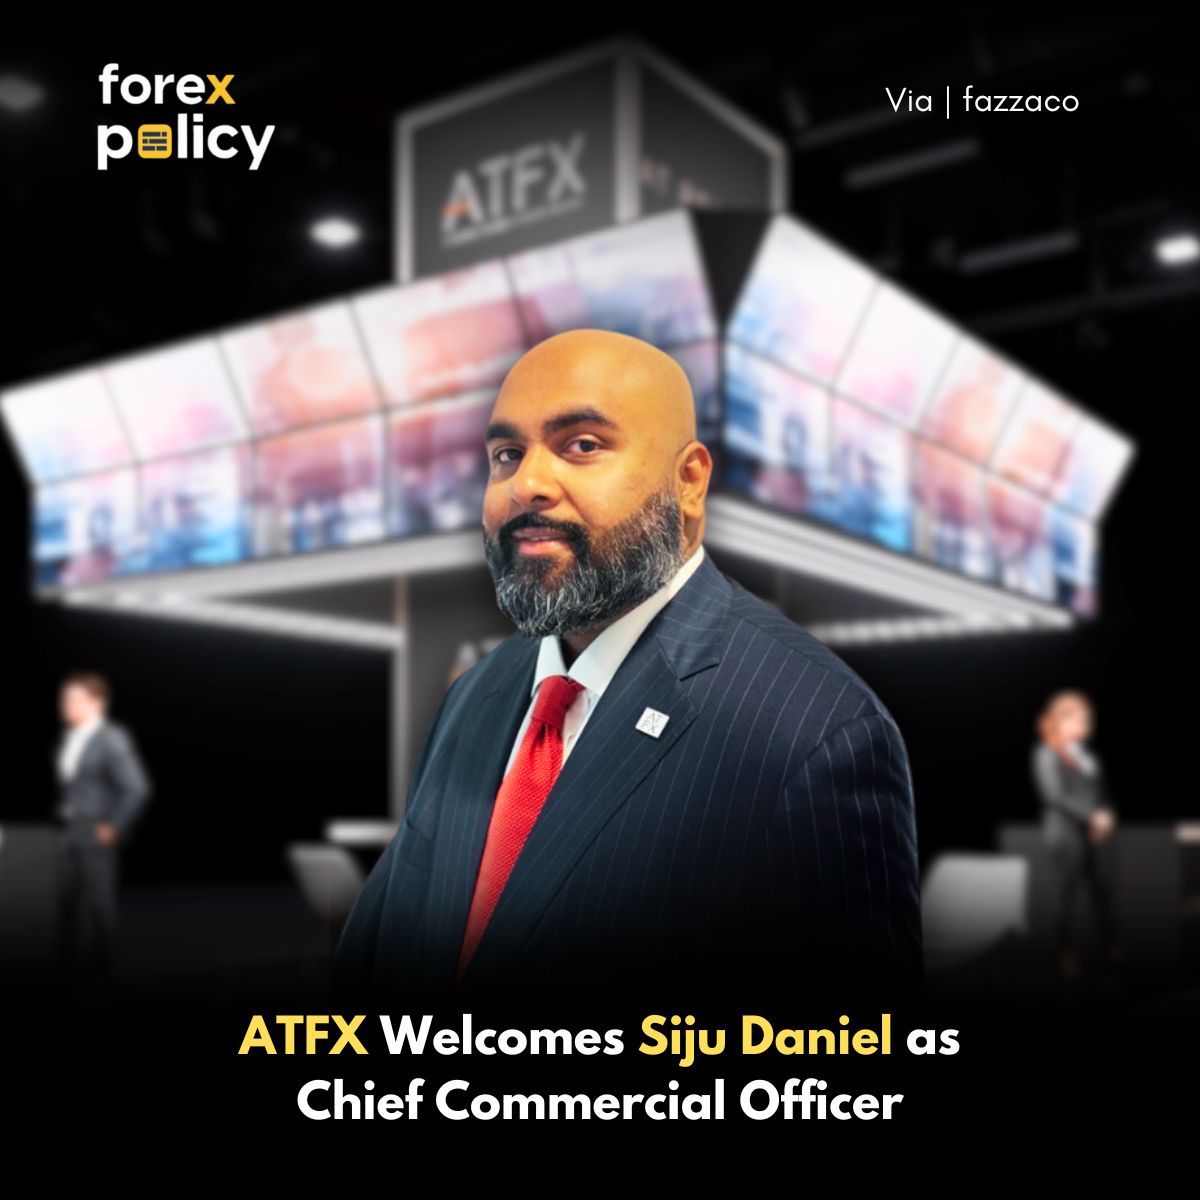 Exciting news from ATFX as they welcome Siju Daniel as their new Chief Commercial Officer! With his wealth of experience, Siju is set to drive global growth and innovation. Congratulations and best wishes on this new journey! 🌍📈 #ATFX #NewLeadership #WelcomeSiju